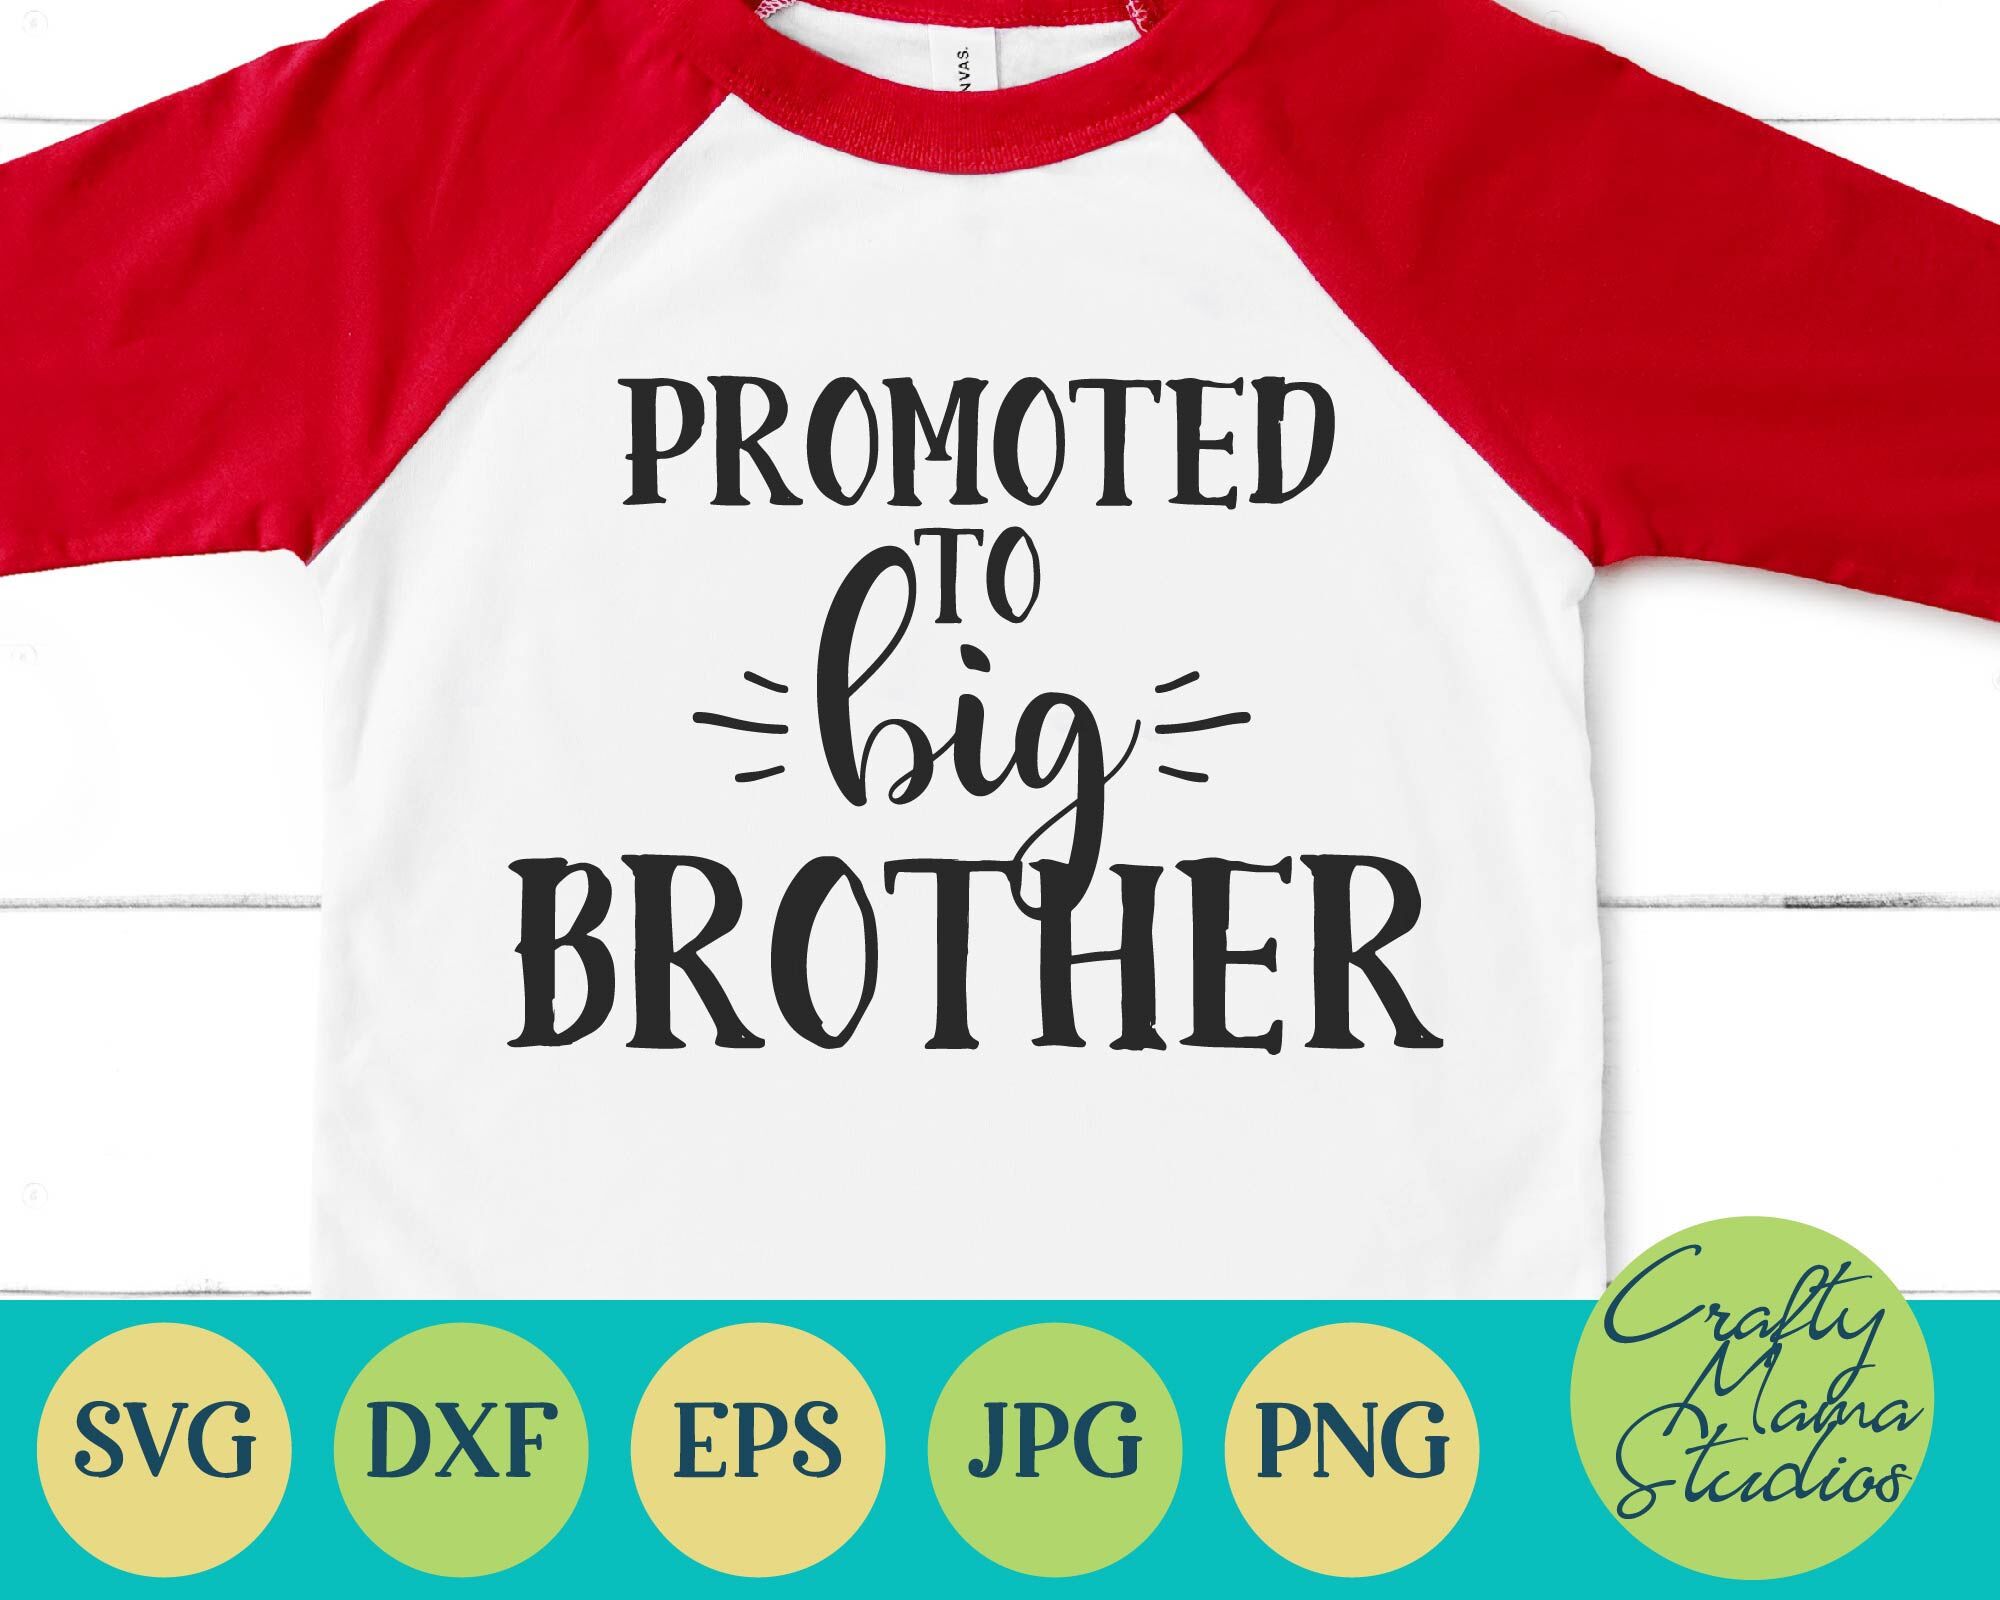 Big Brother Svg Promoted To Big Brother Svg By Crafty Mama Studios Thehungryjpeg Com